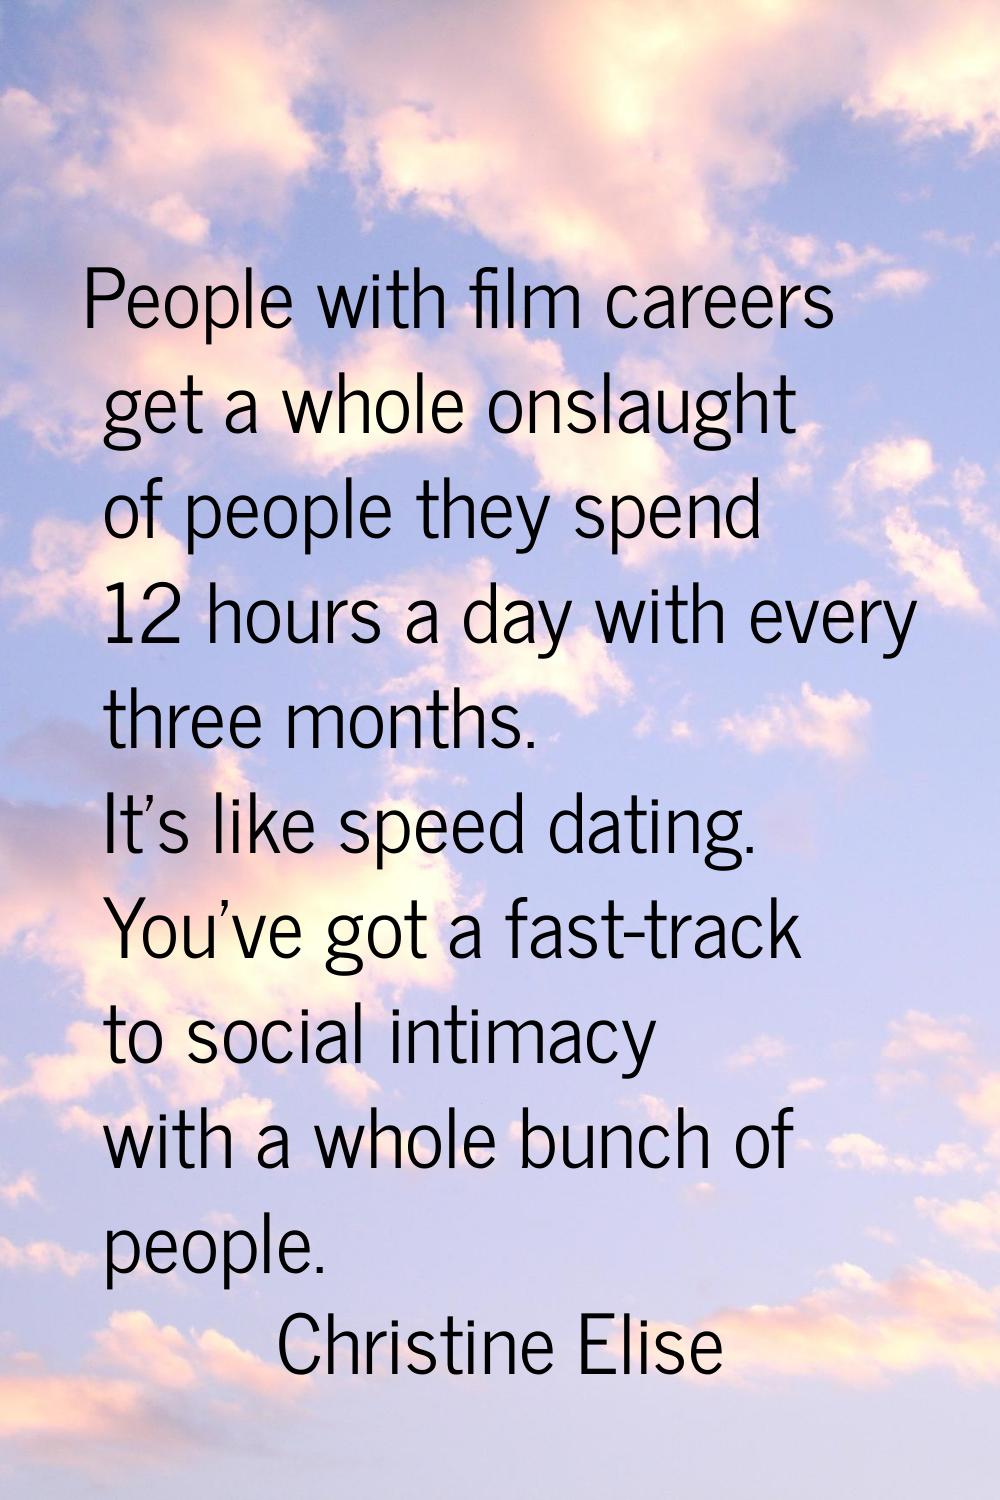 People with film careers get a whole onslaught of people they spend 12 hours a day with every three